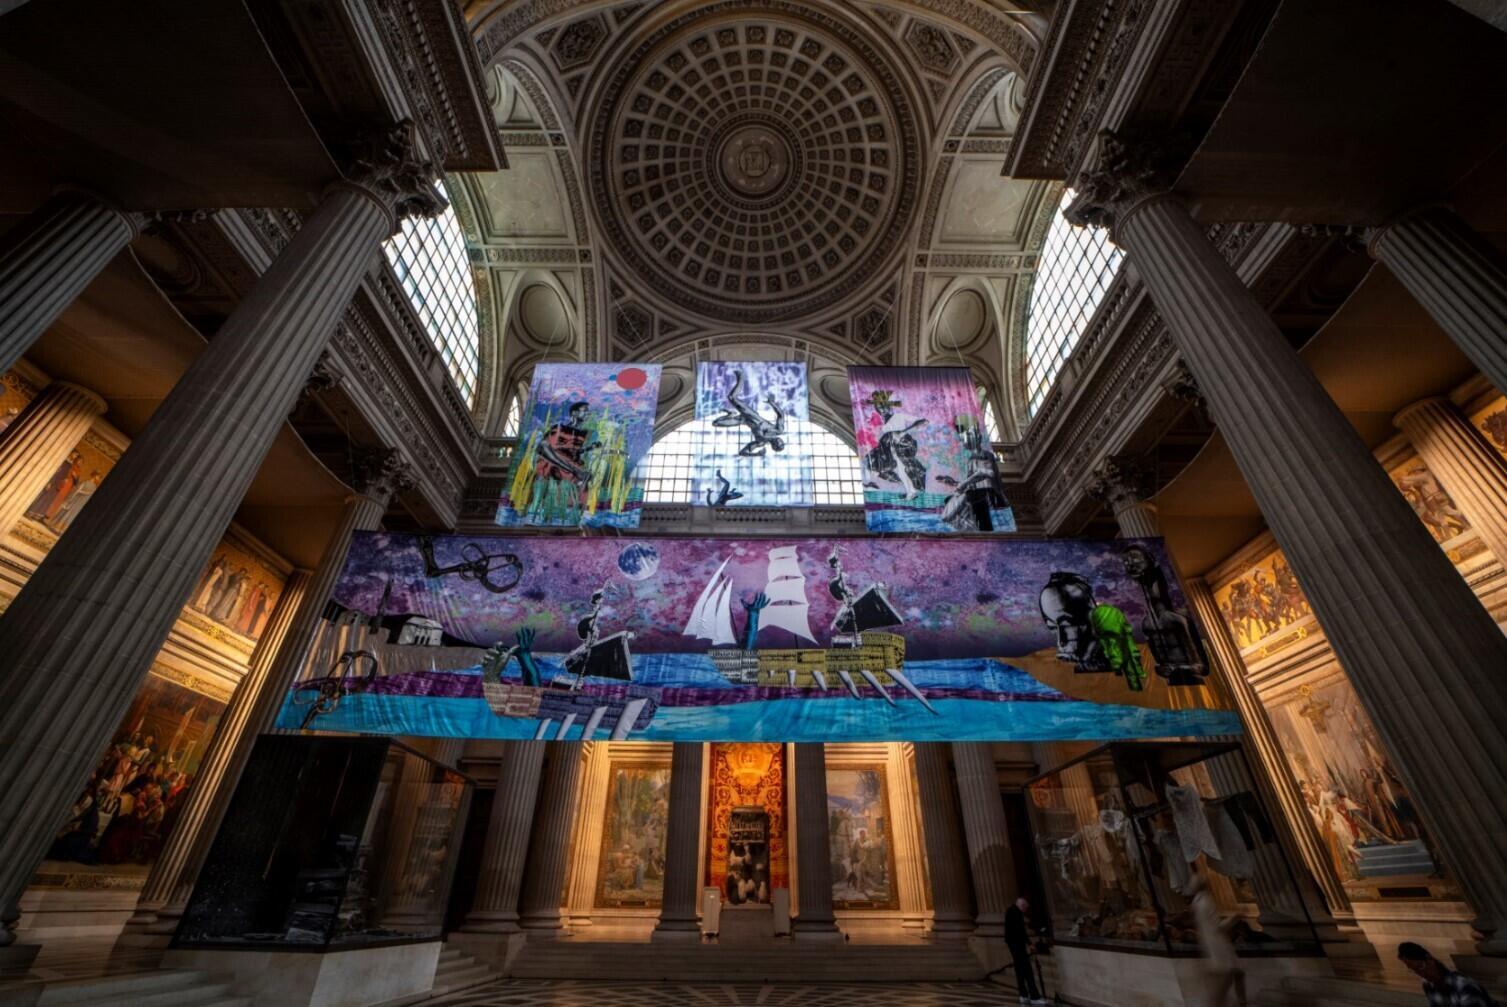 Scene from Raphaël Barontini's exhibition "We could be Heroes" about the abolition of slavery, at the Pantheon in Paris, 19 October 2023 until 11 February 2024.